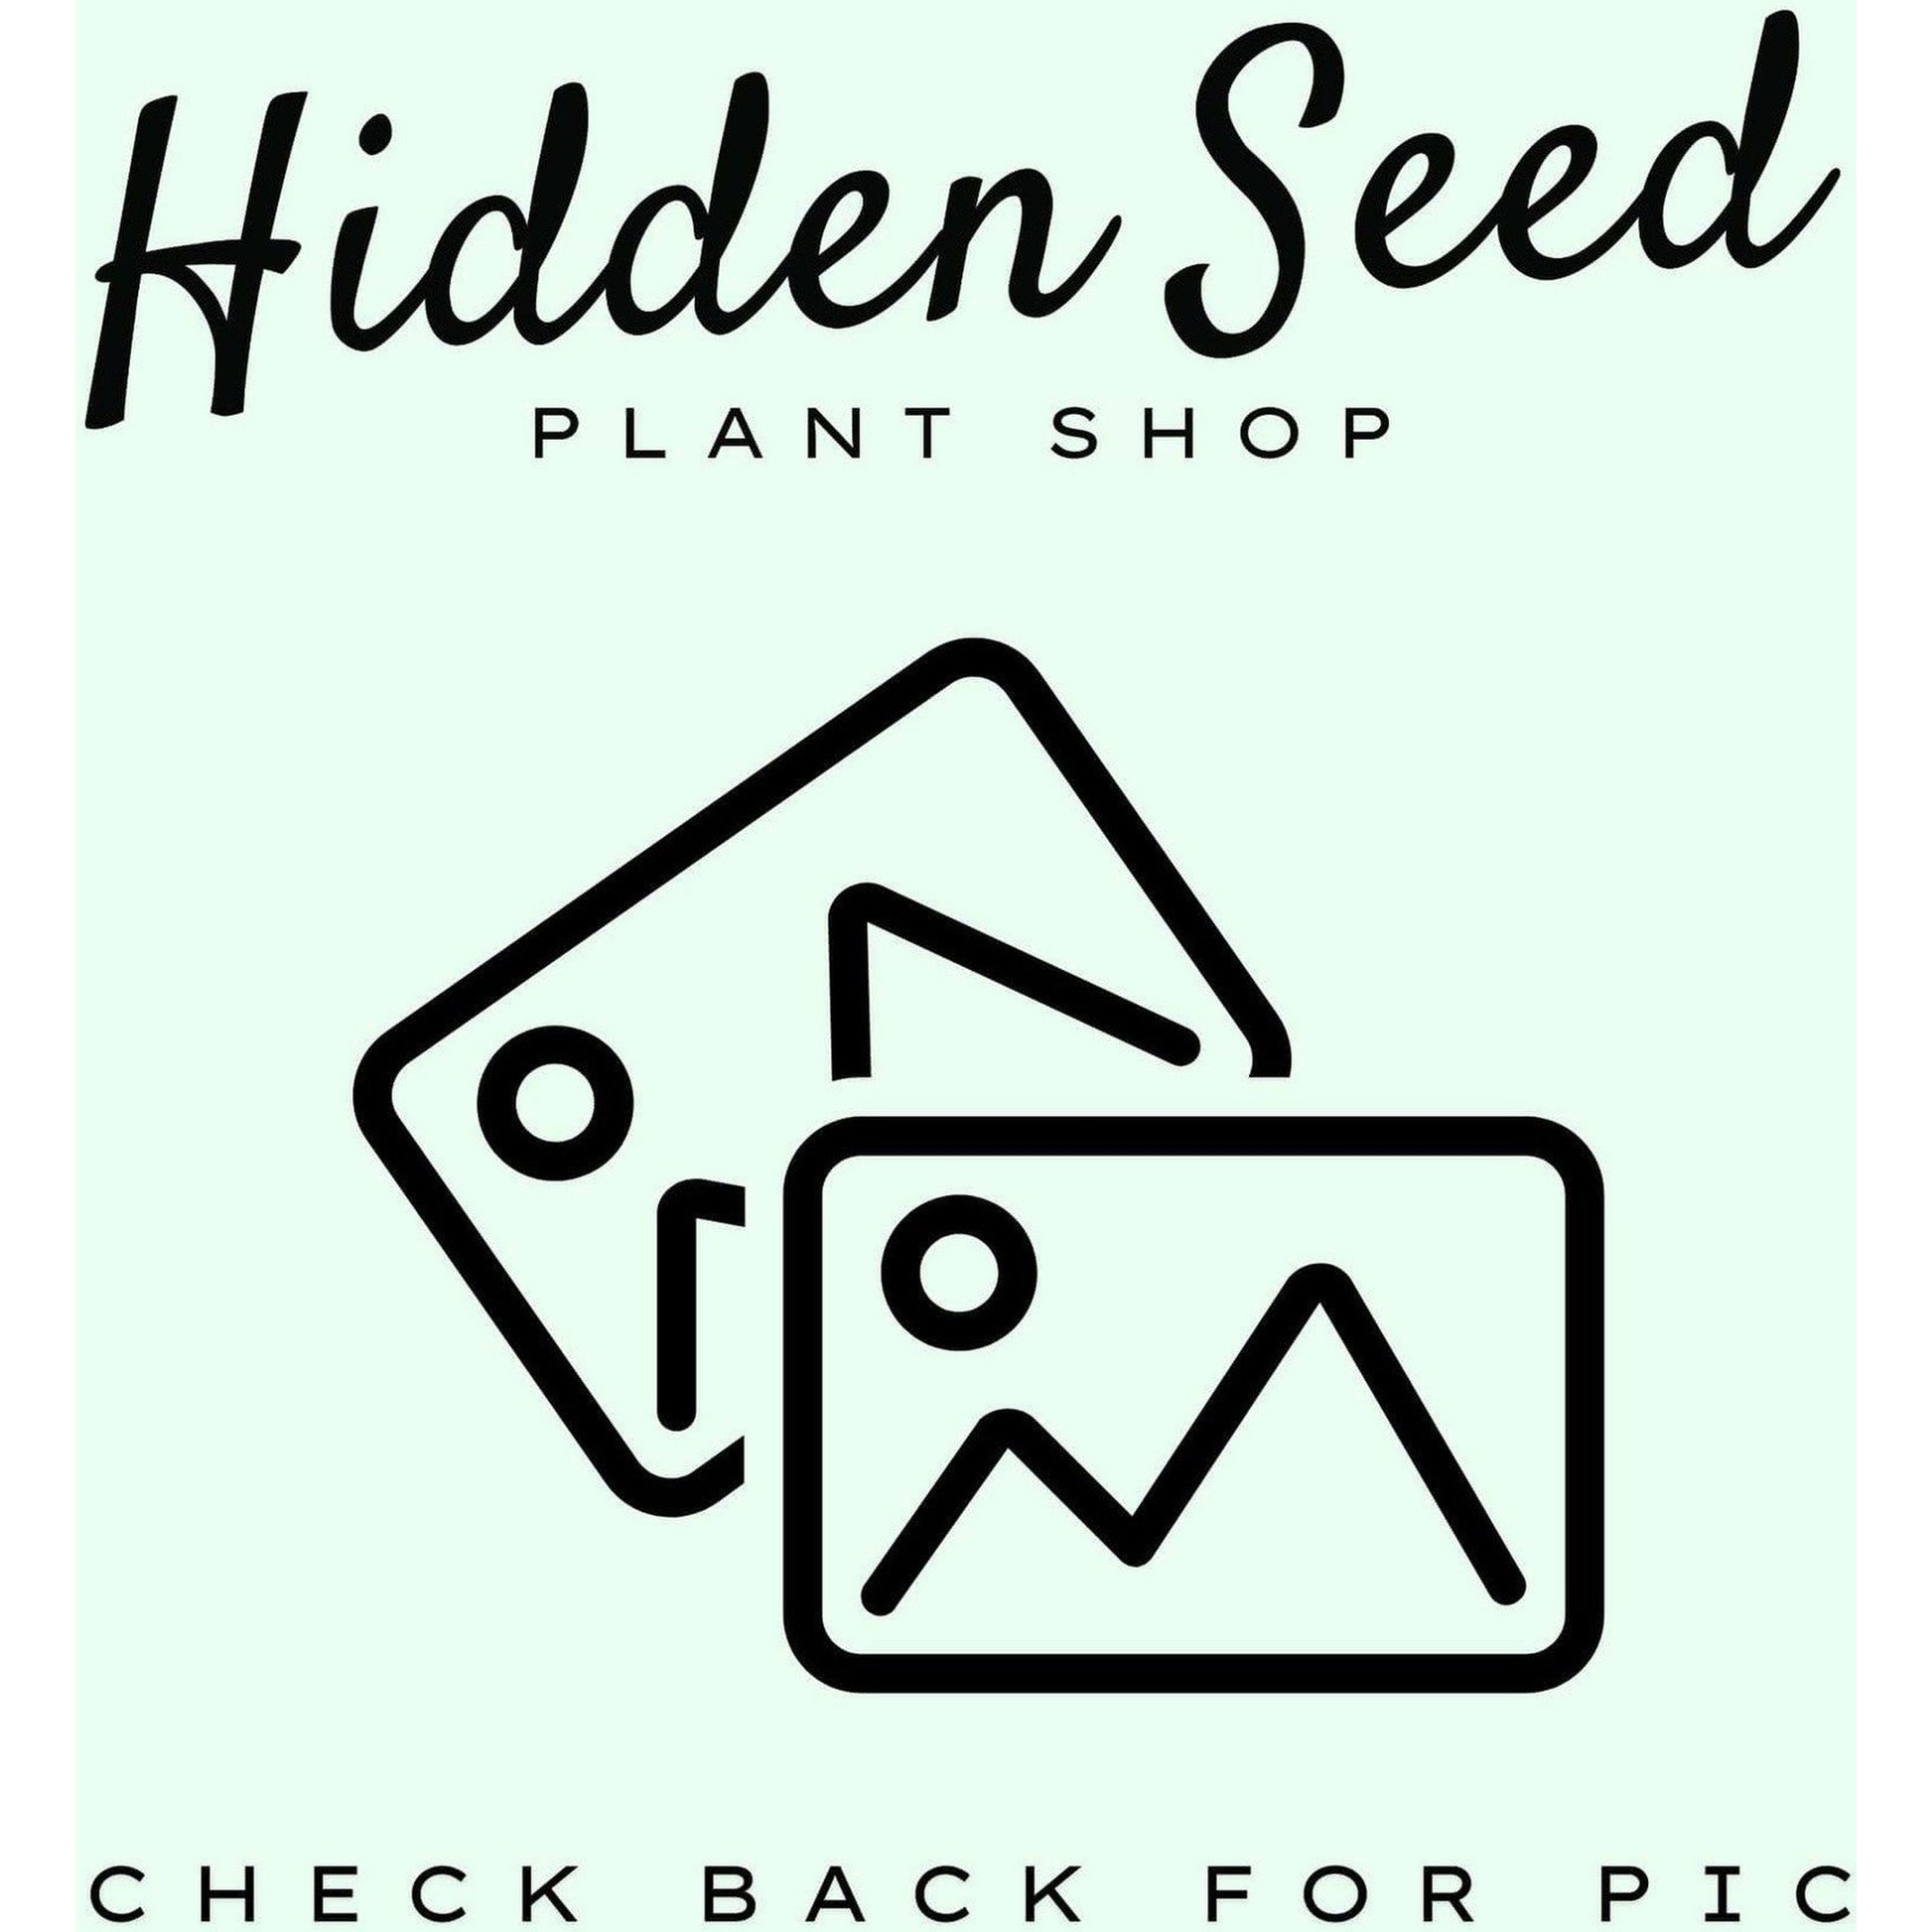 Filli Plant Stand-available at Hidden Seed Plant Shop